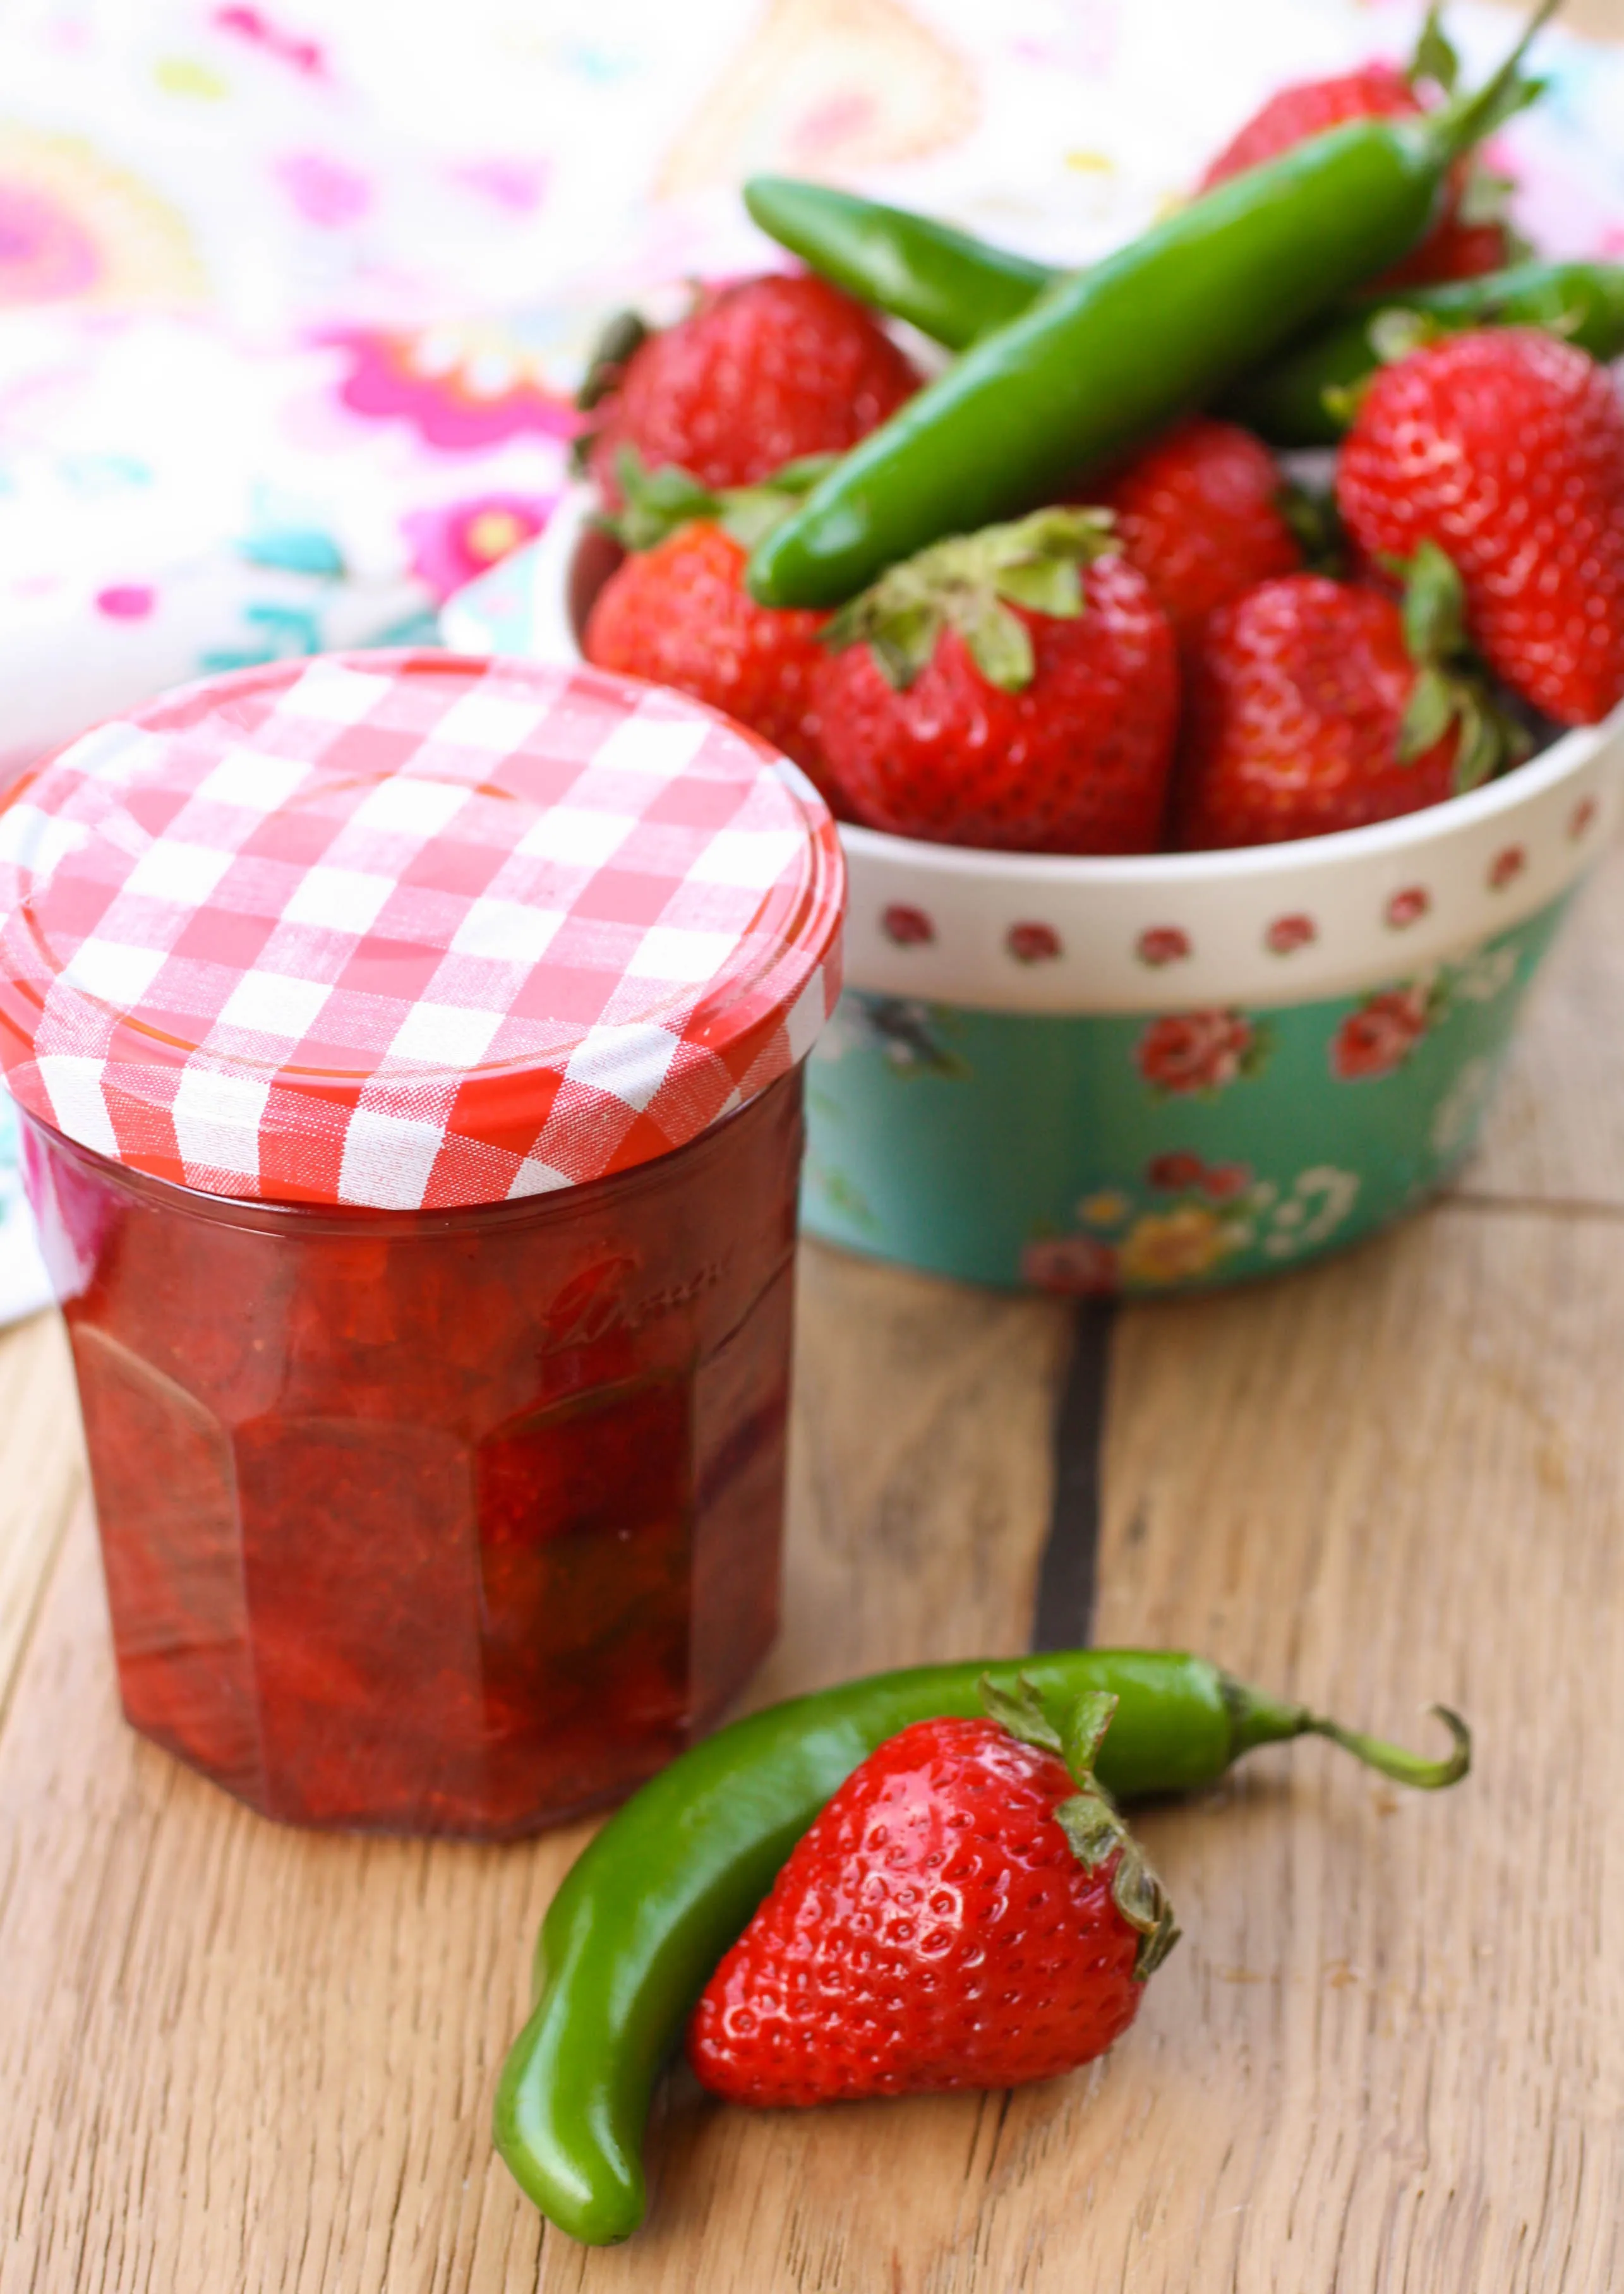 Small Batch Strawberry-Serrano Refrigerator Jam is a fun treat for the family! This seasonal jam is so easy to make, too!